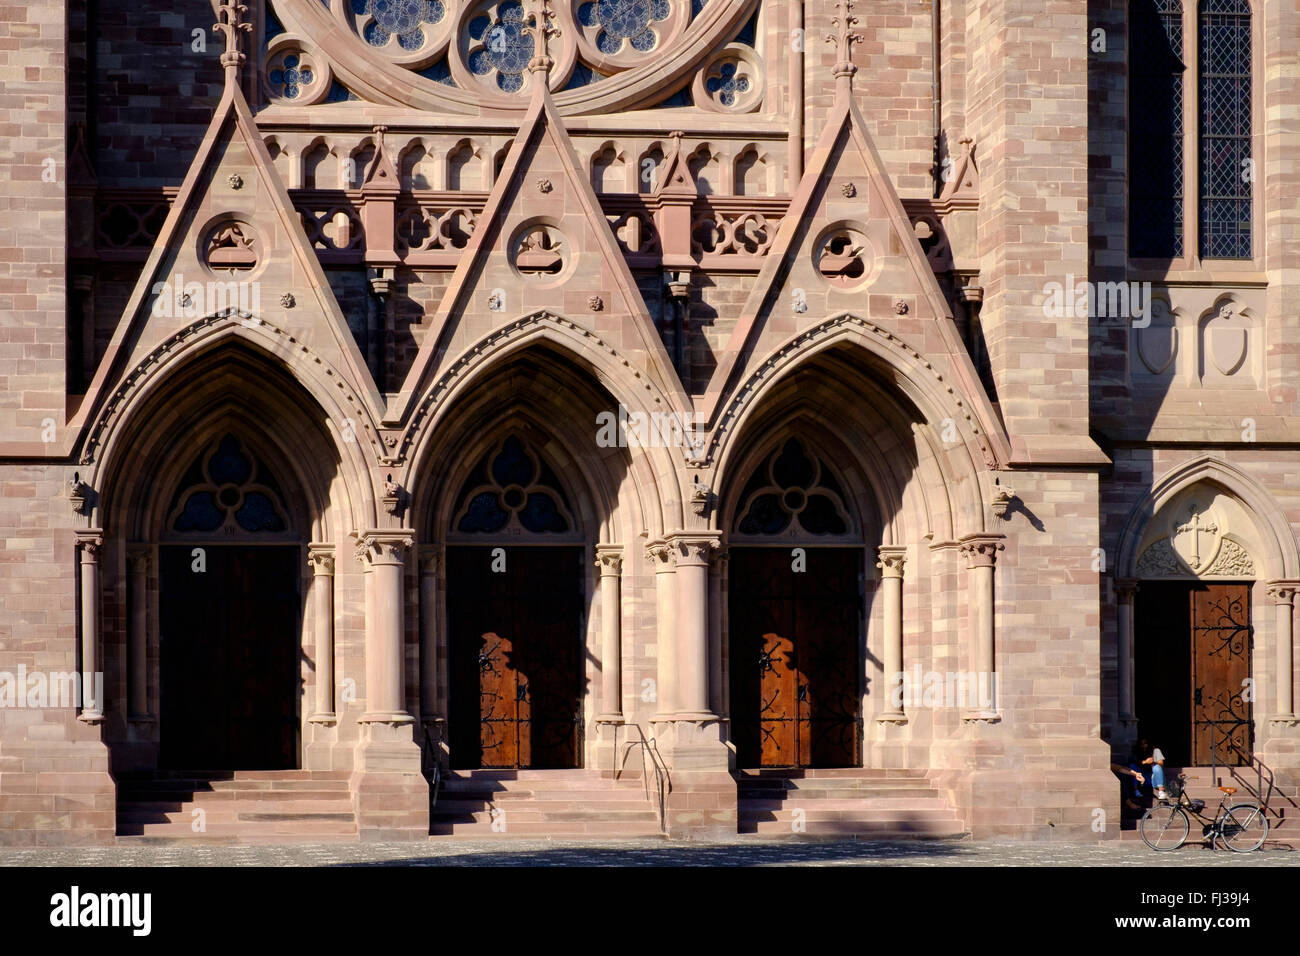 Portals of St Paul protestant church, Strasbourg, Alsace, France, Europe Stock Photo